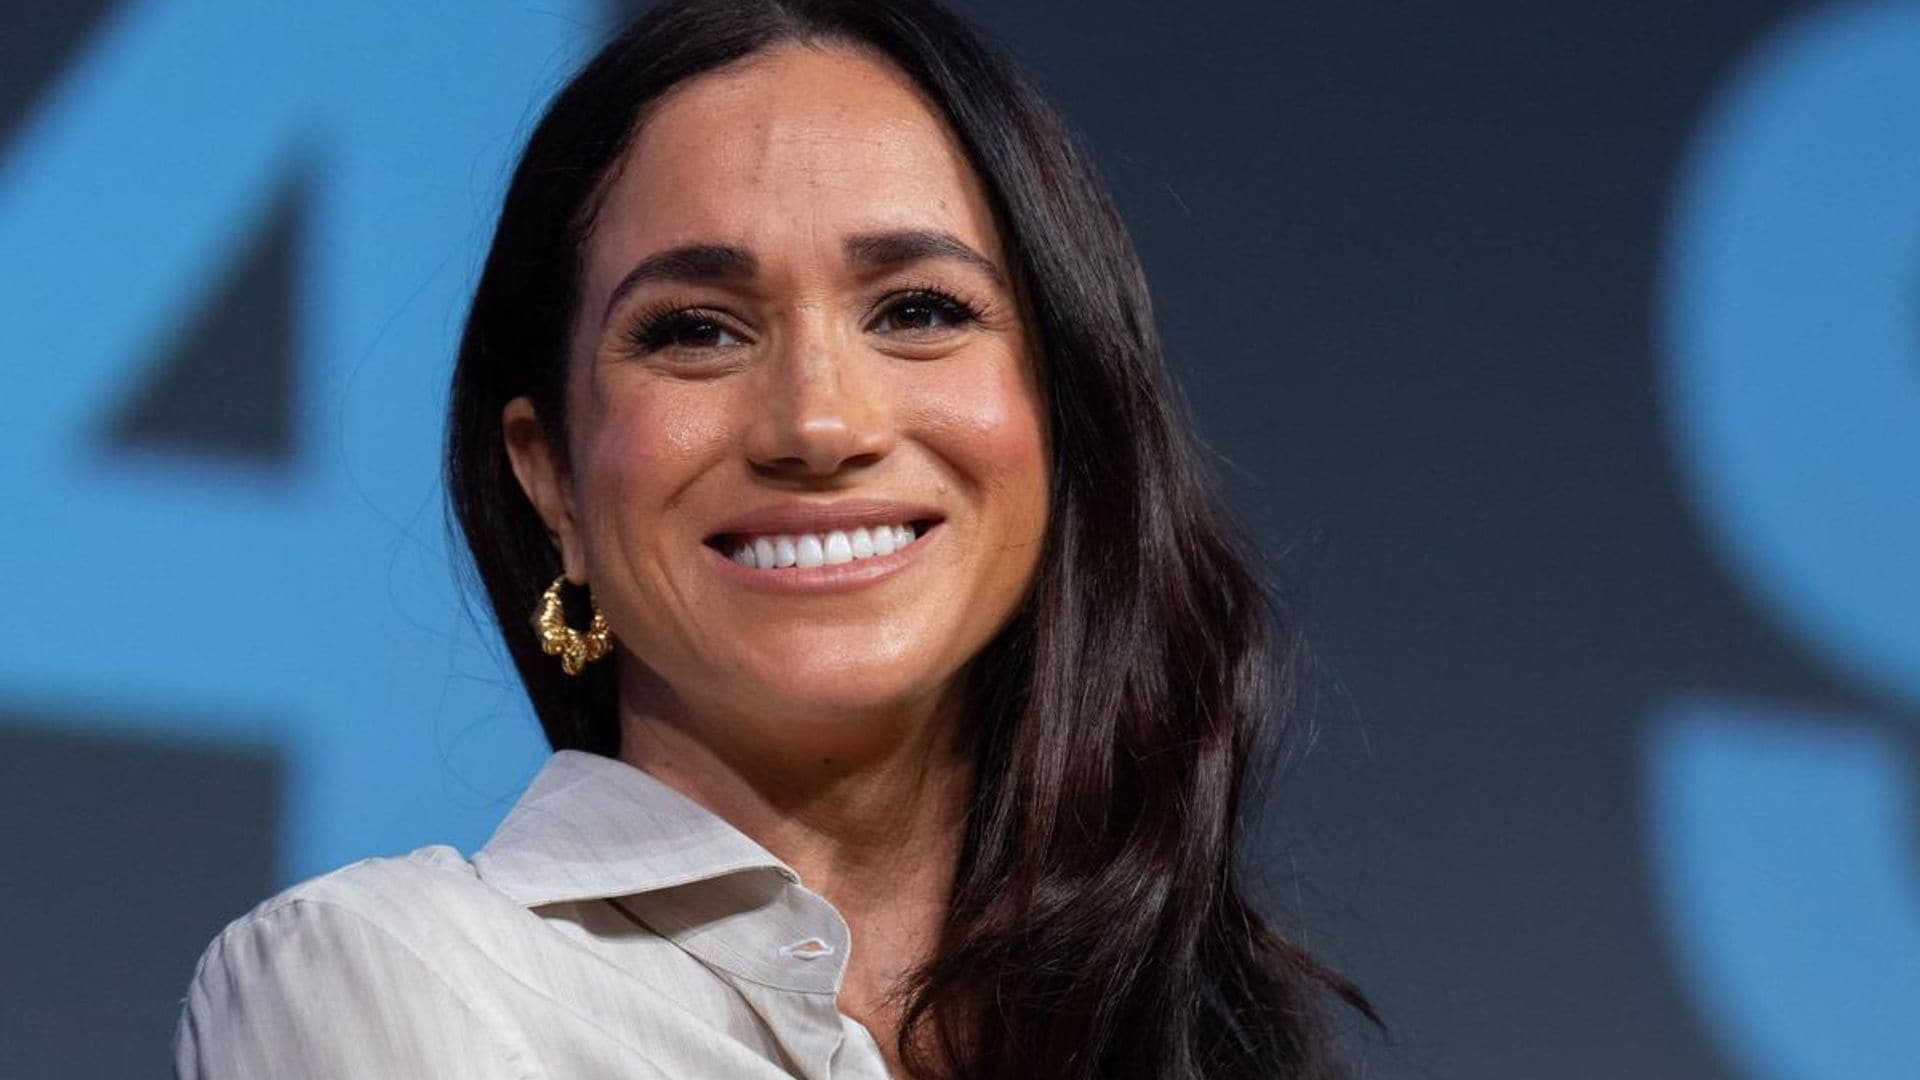 Meghan Markle has ‘glamorous’ photoshoot with kids Prince Archie and Princess Lilibet: report